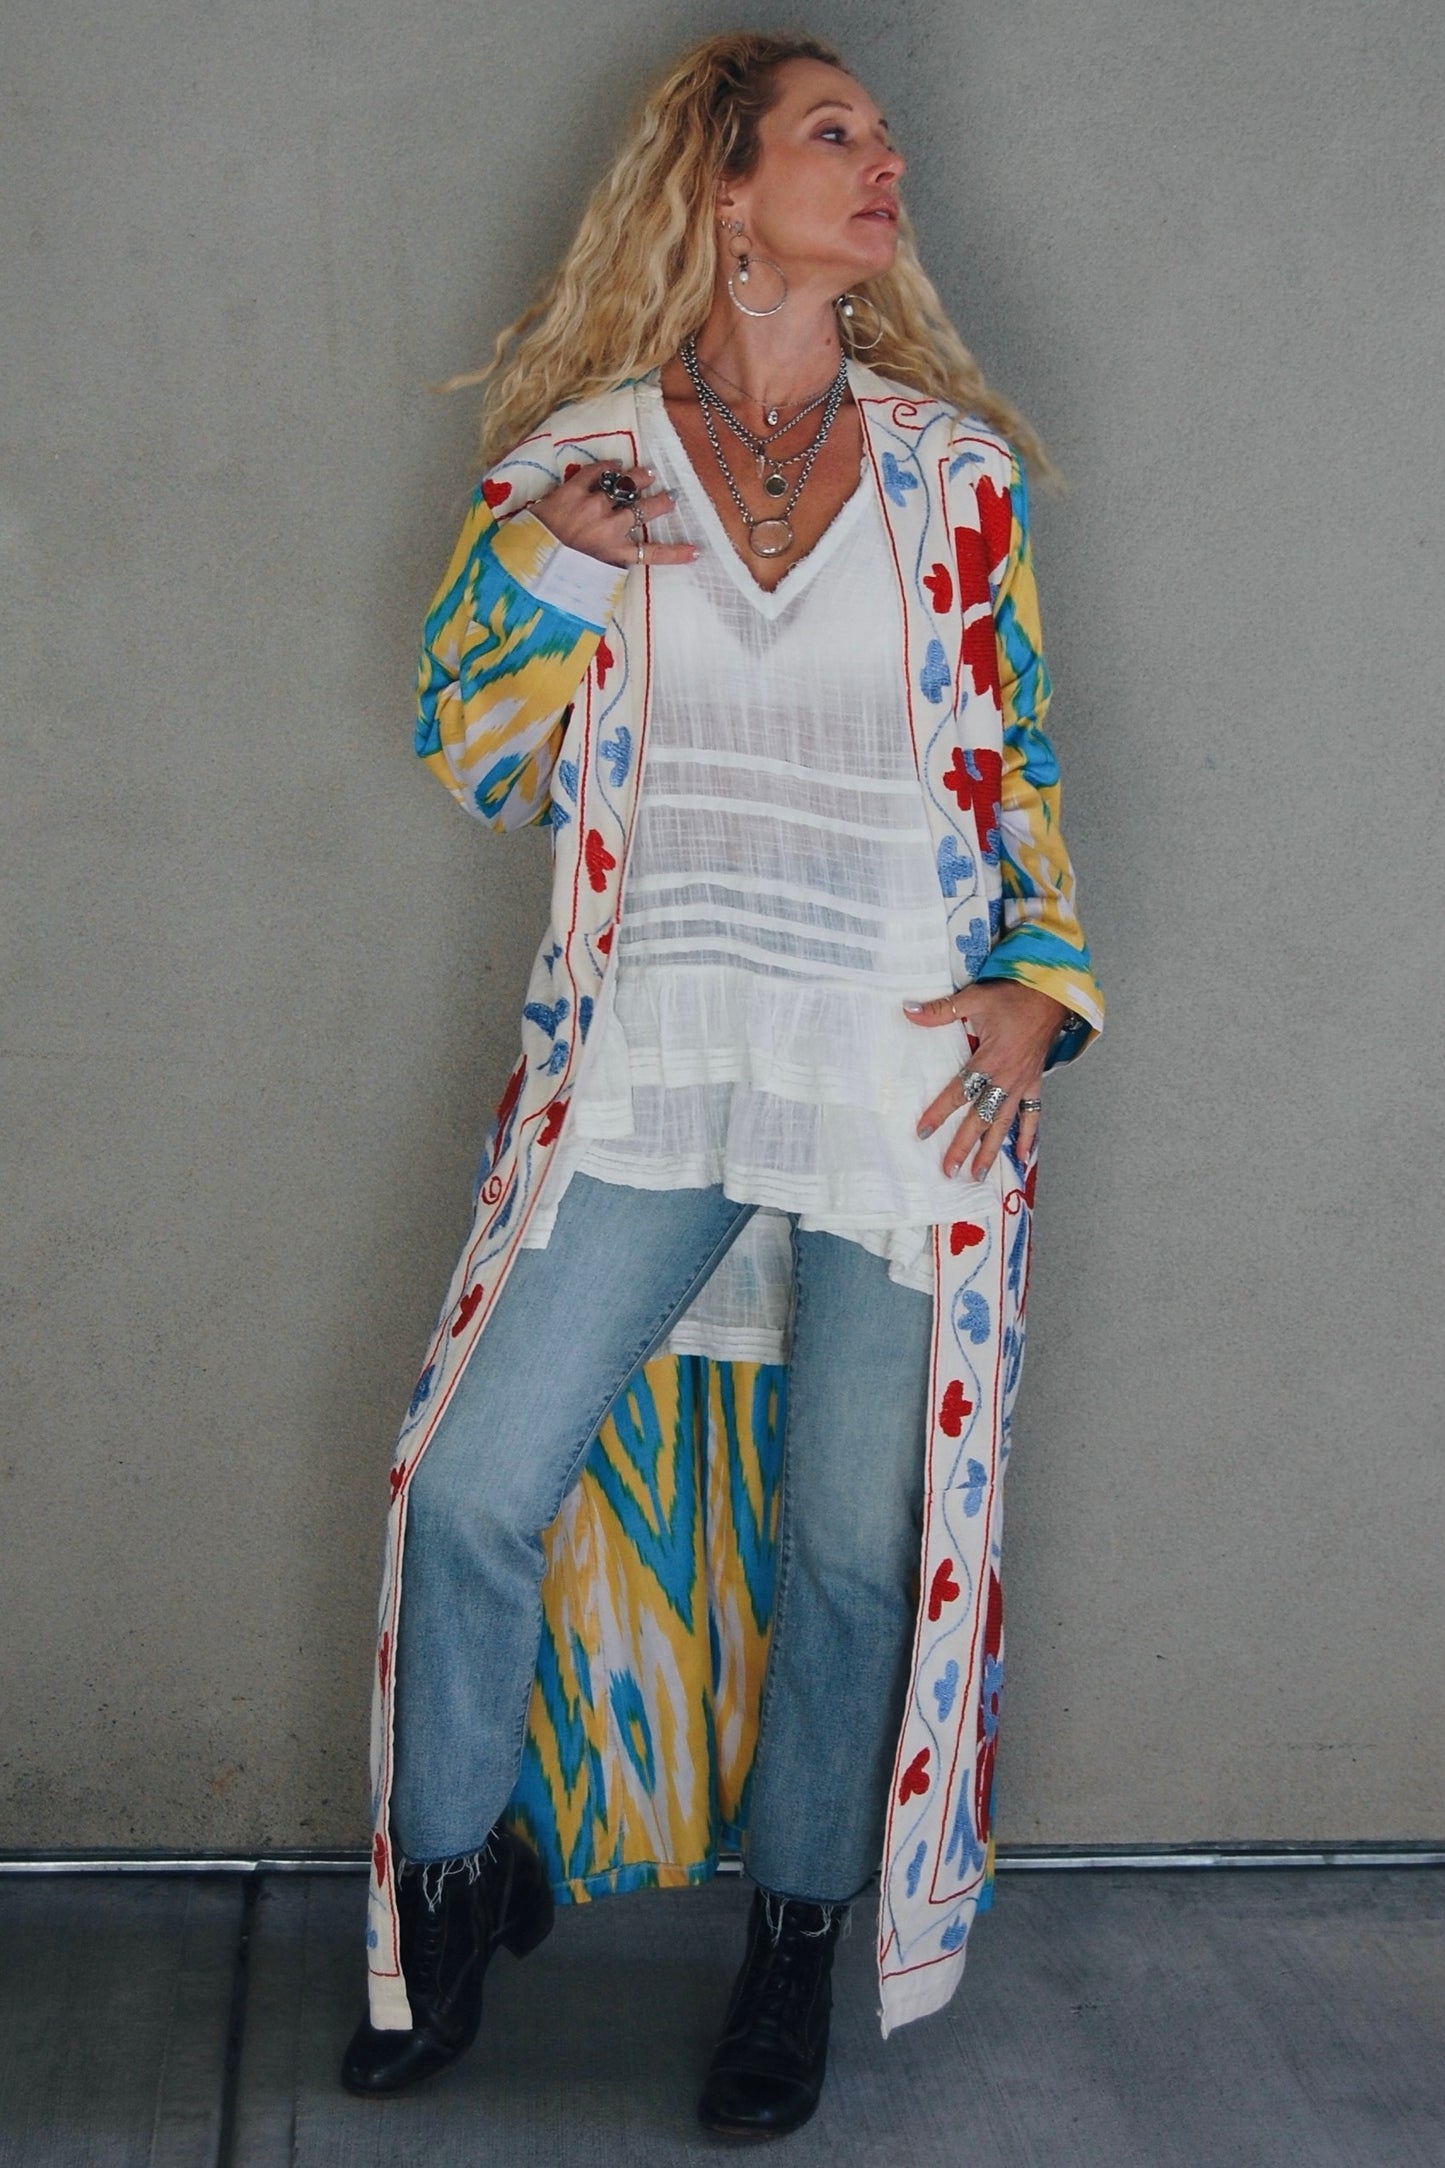 Load image into Gallery viewer, The Dreamer Jacket in Tropical Ikat - SpiritedBoutiques Boho Hippie Boutique Style Jacket, Spirited
